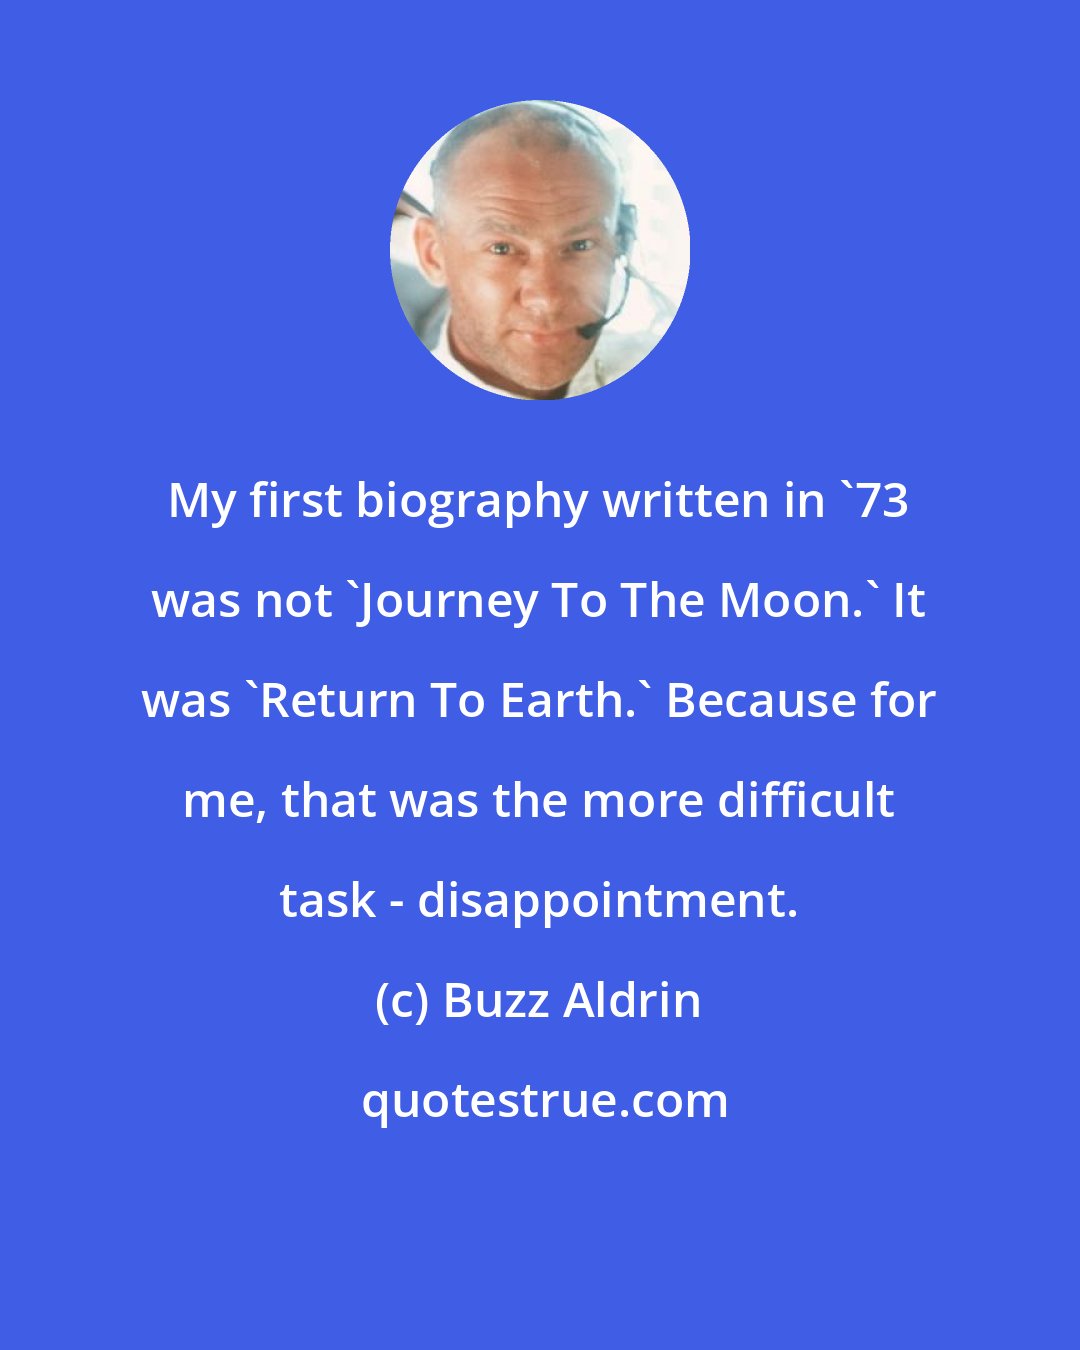 Buzz Aldrin: My first biography written in '73 was not 'Journey To The Moon.' It was 'Return To Earth.' Because for me, that was the more difficult task - disappointment.